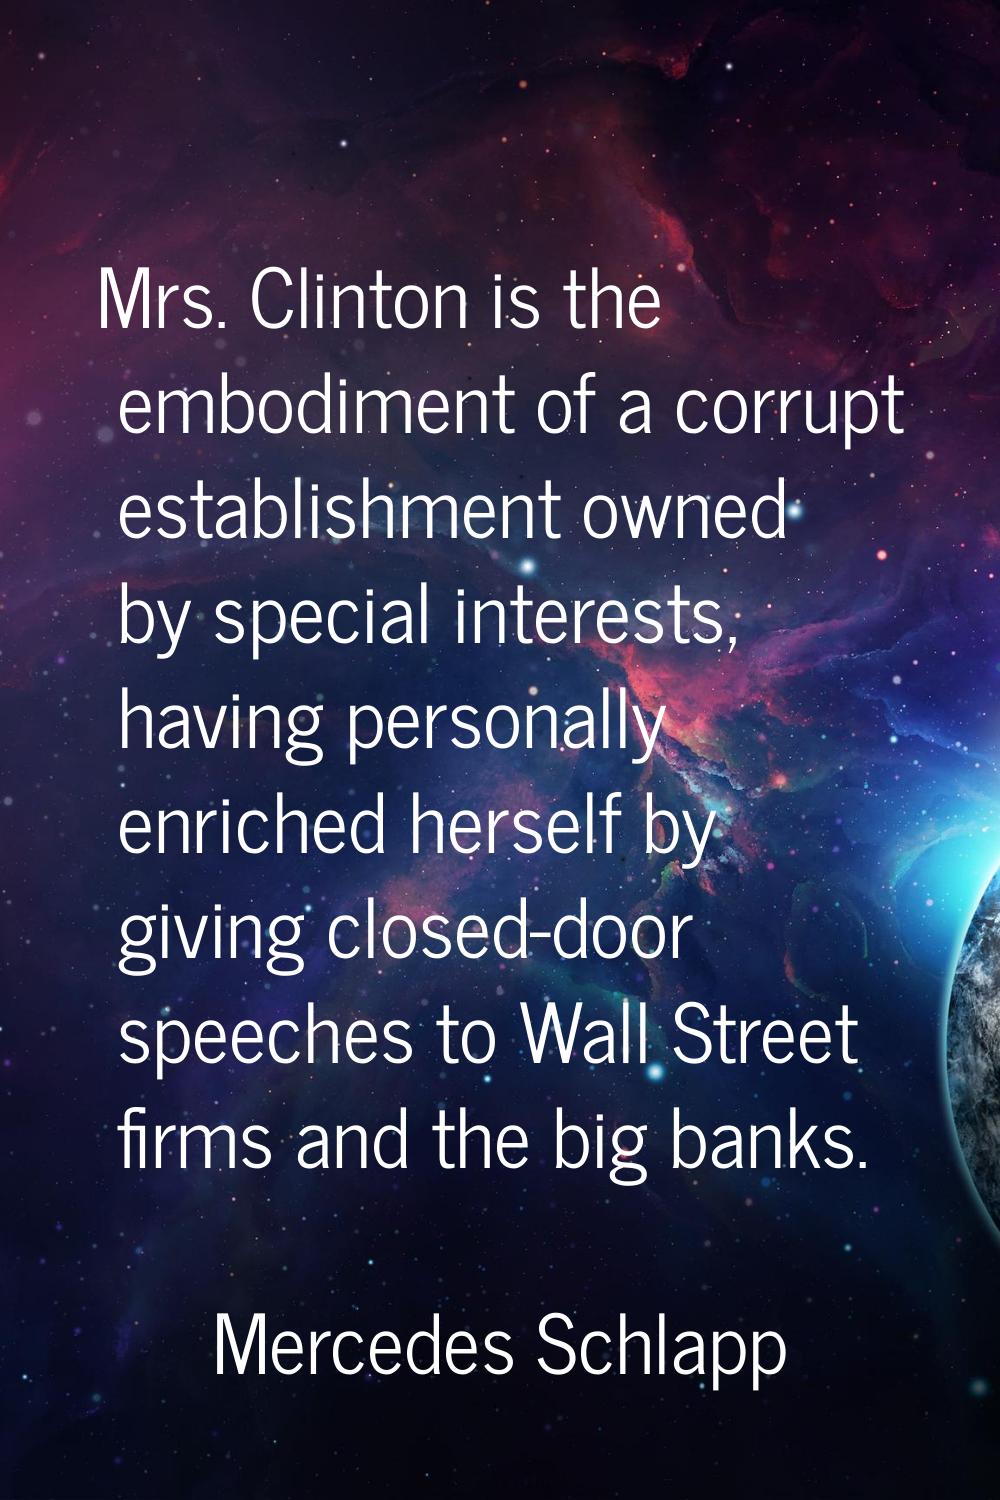 Mrs. Clinton is the embodiment of a corrupt establishment owned by special interests, having person